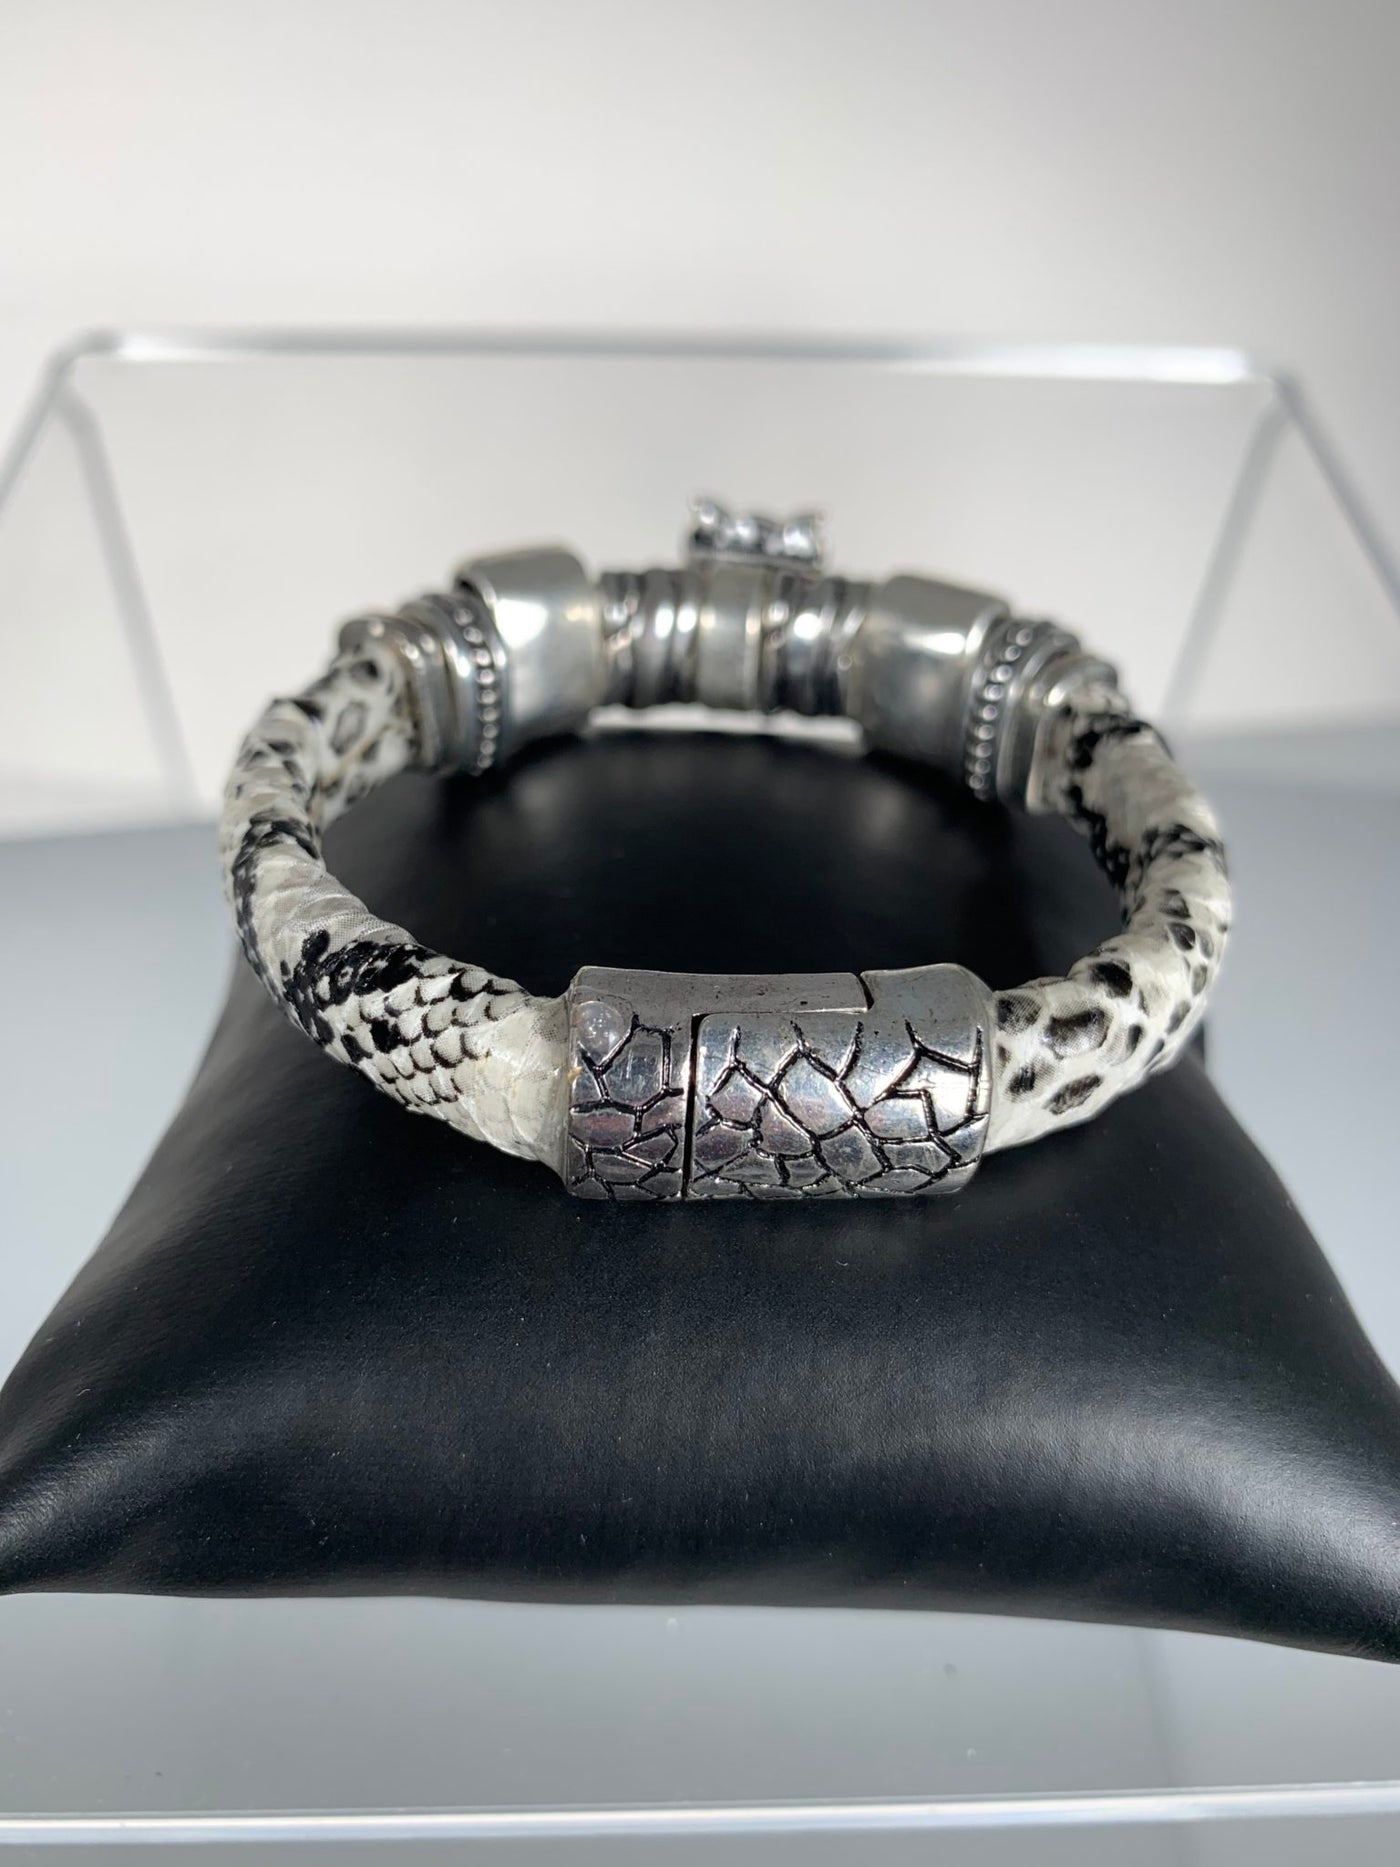 White Faux Snake Skin Band Bracelet Featuring a Wise Owl